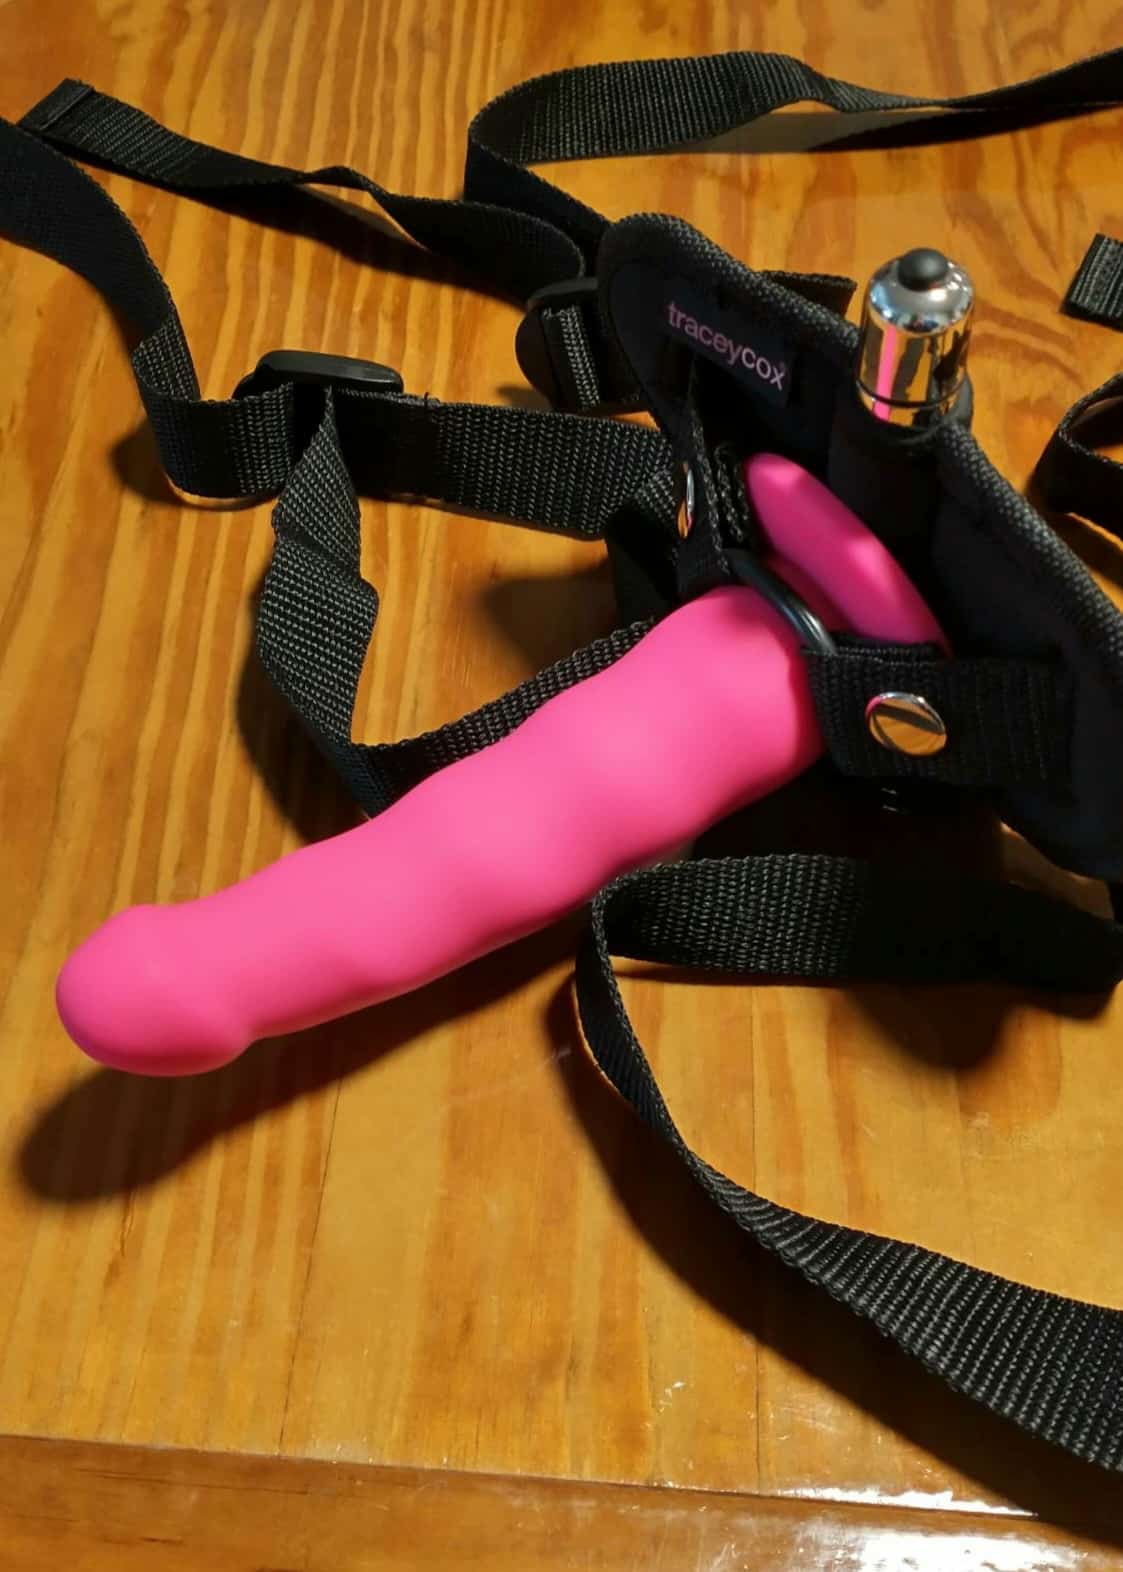 Tracey Cox Supersex Strap-On Pegging Kit. Slide 4